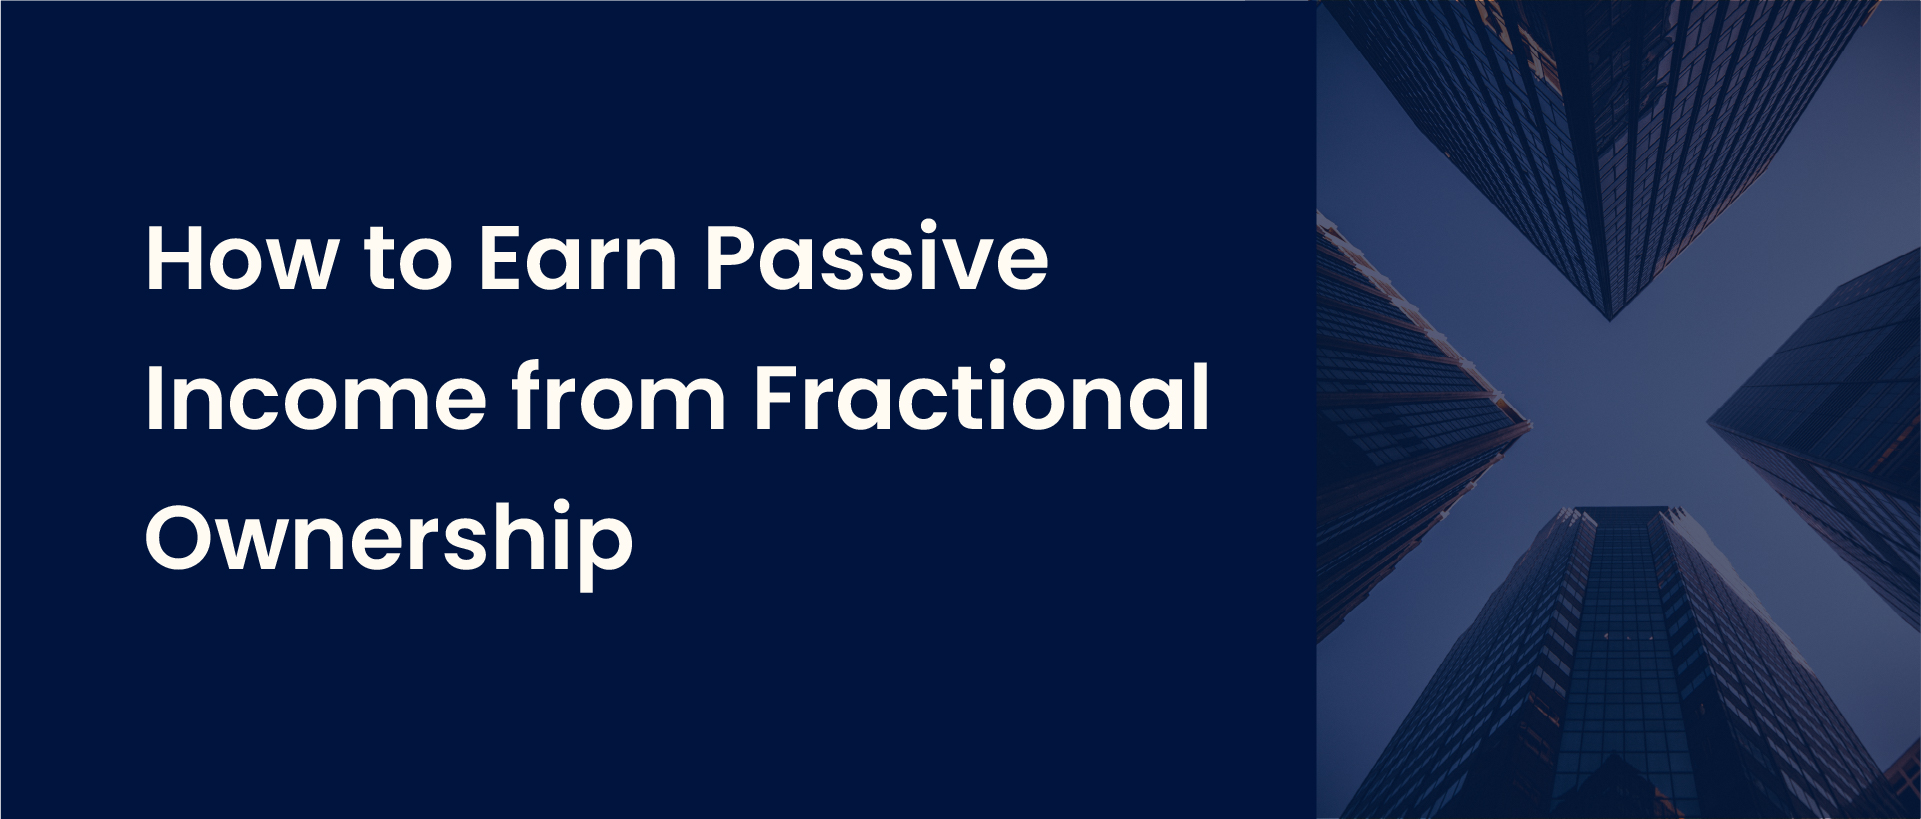 How To Earn Passive Income From Fractional Ownership